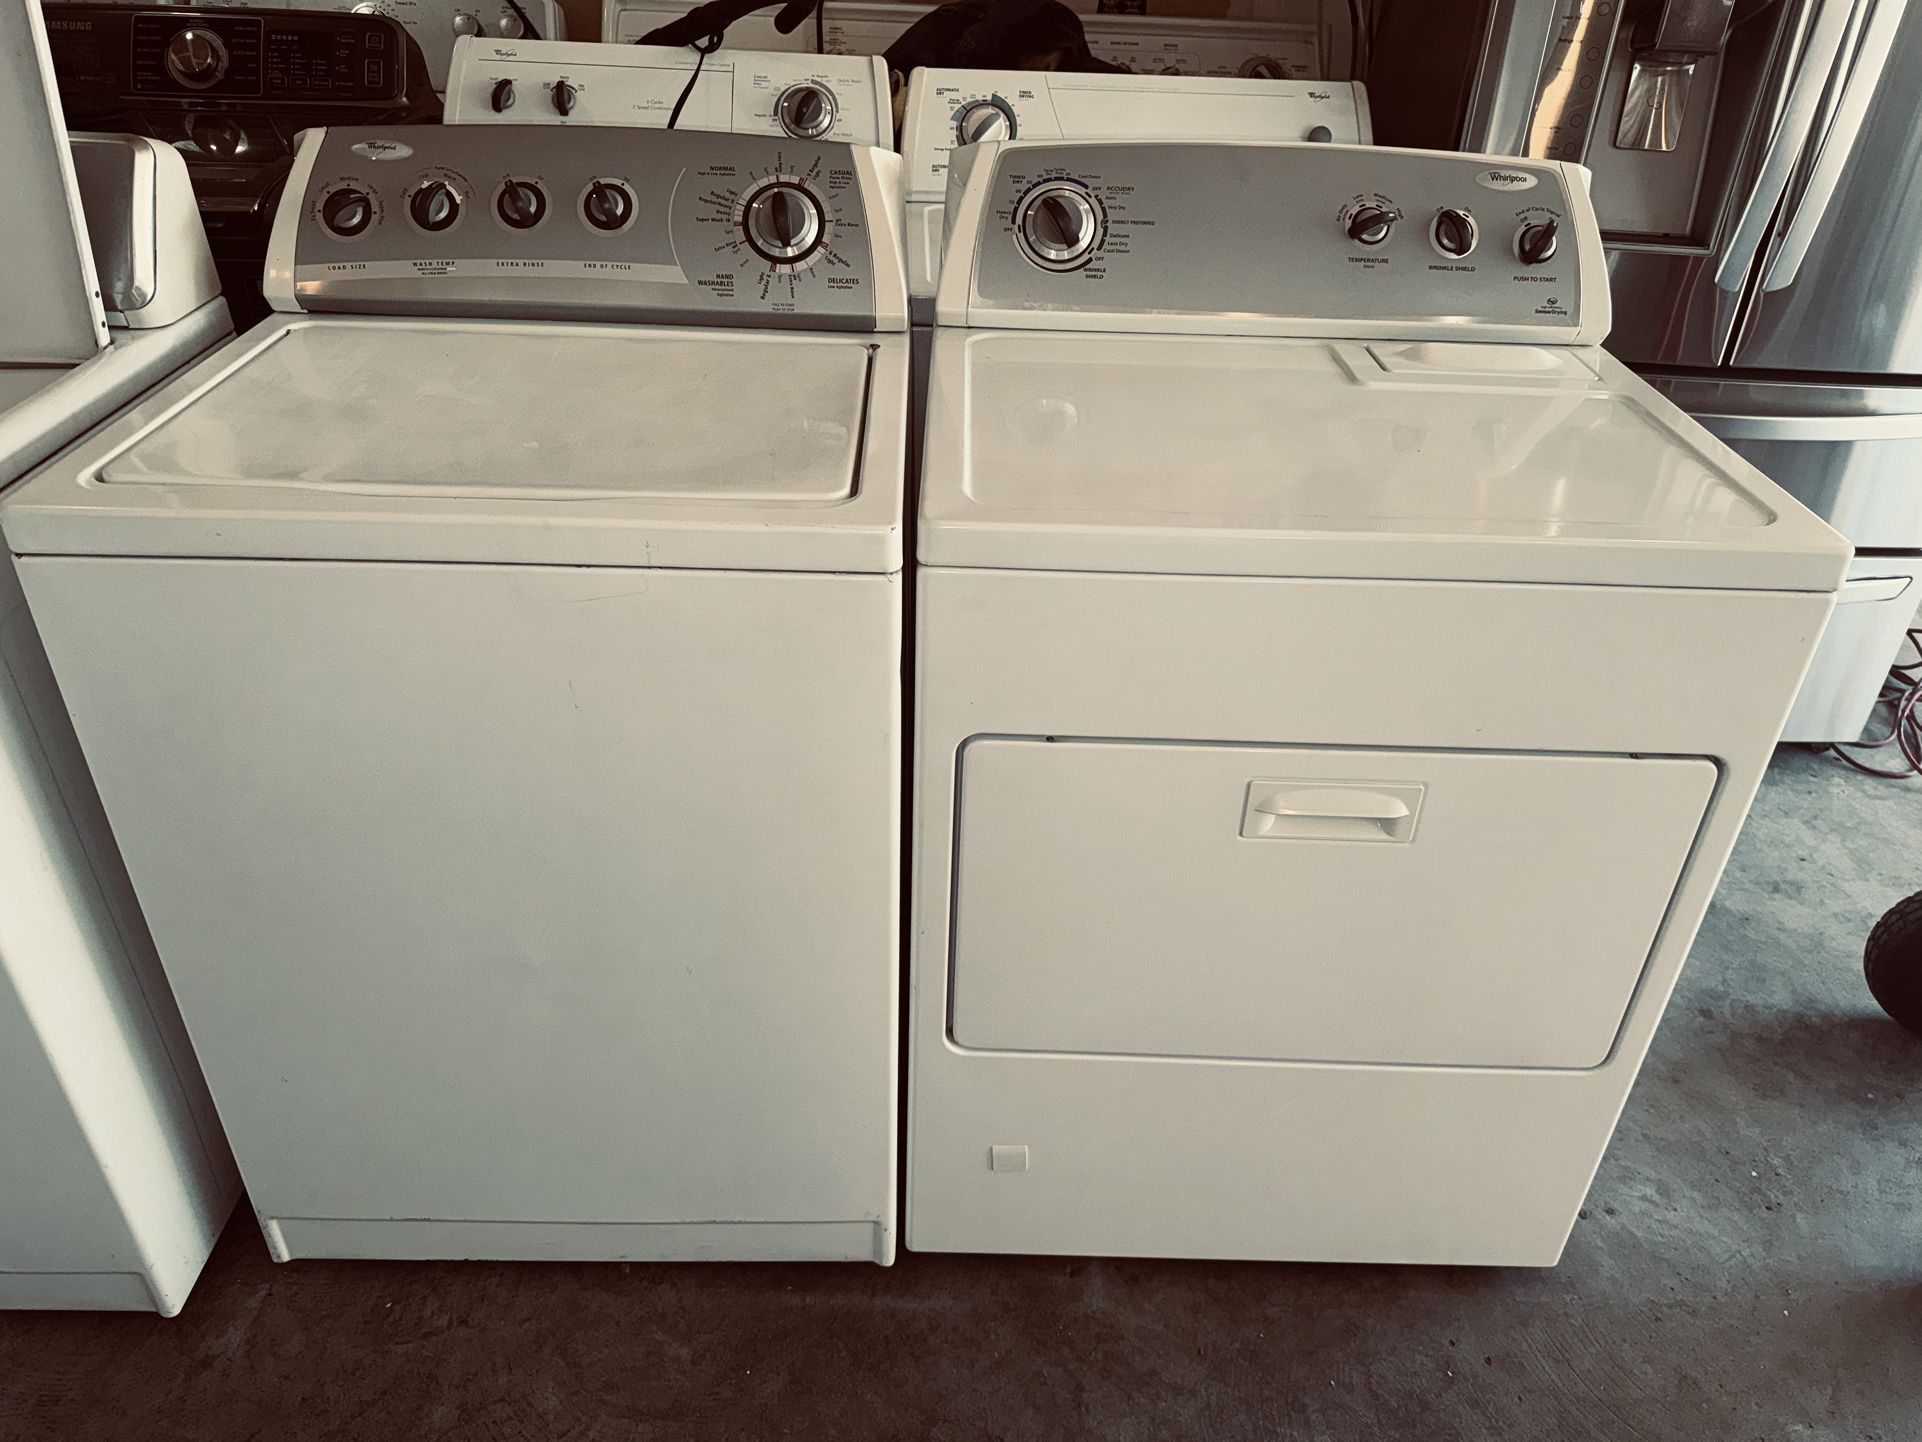 Whirlpool Washer And Gas Dryer Works Perfect 3 Month Warranty We Deliver 